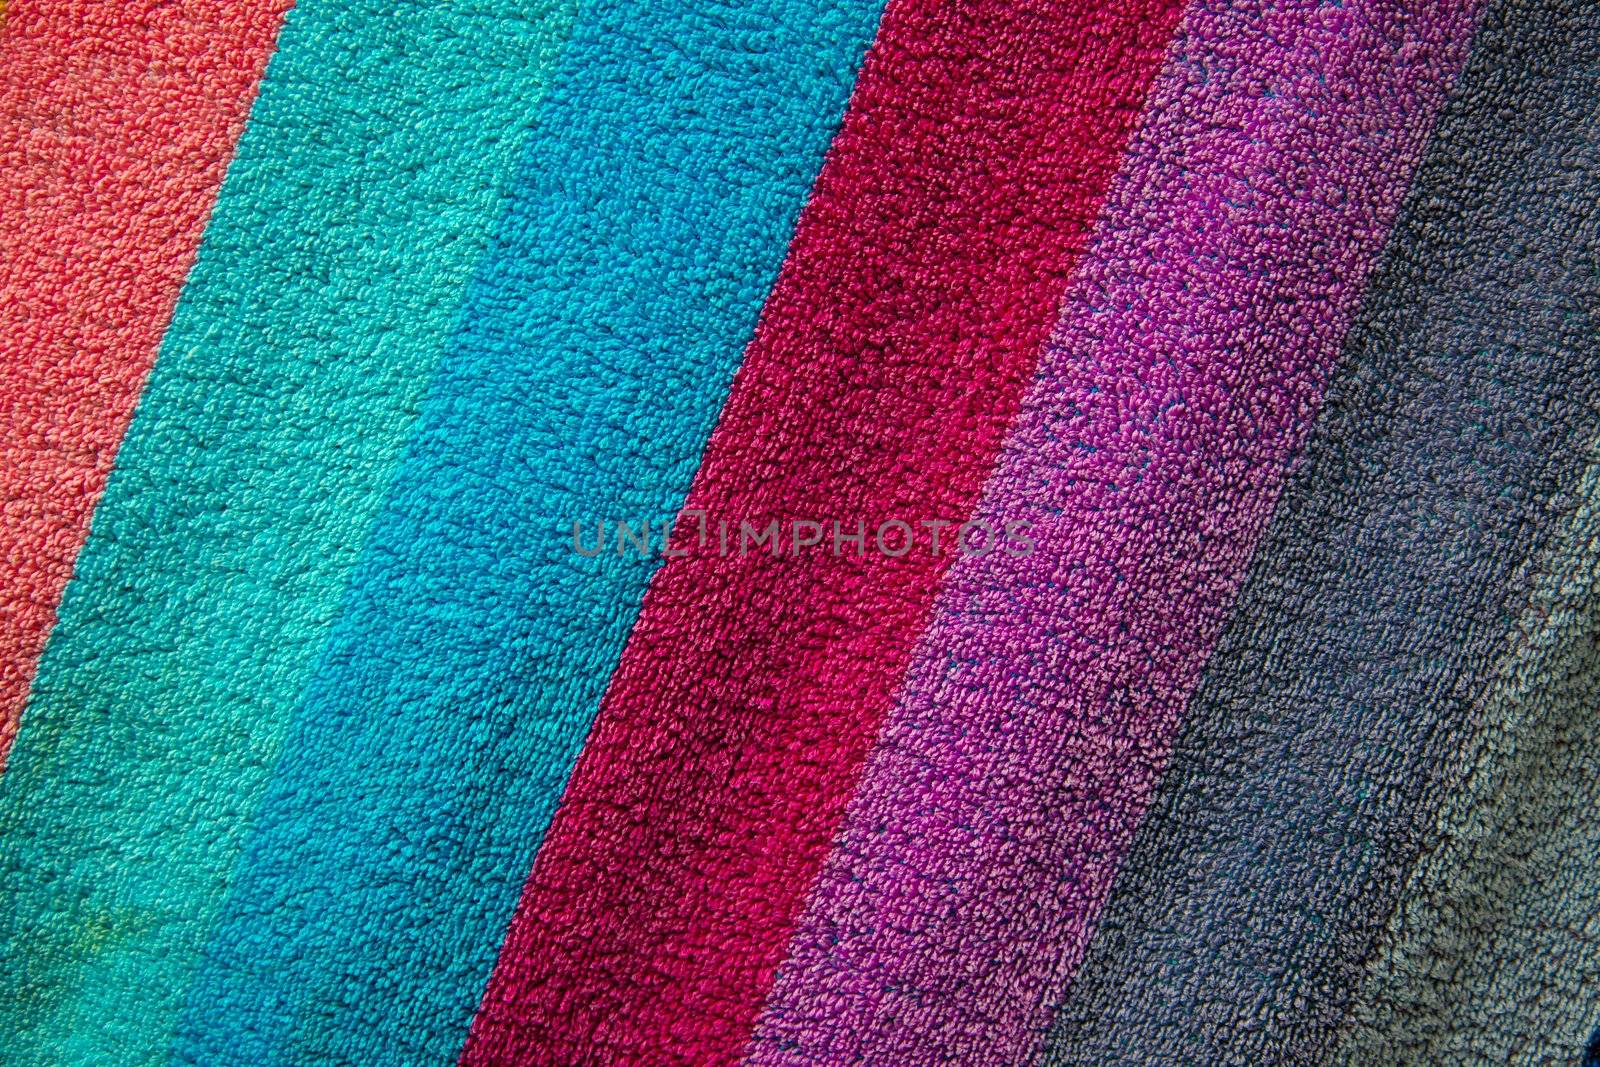 Textile towel texture with colorful stripes across